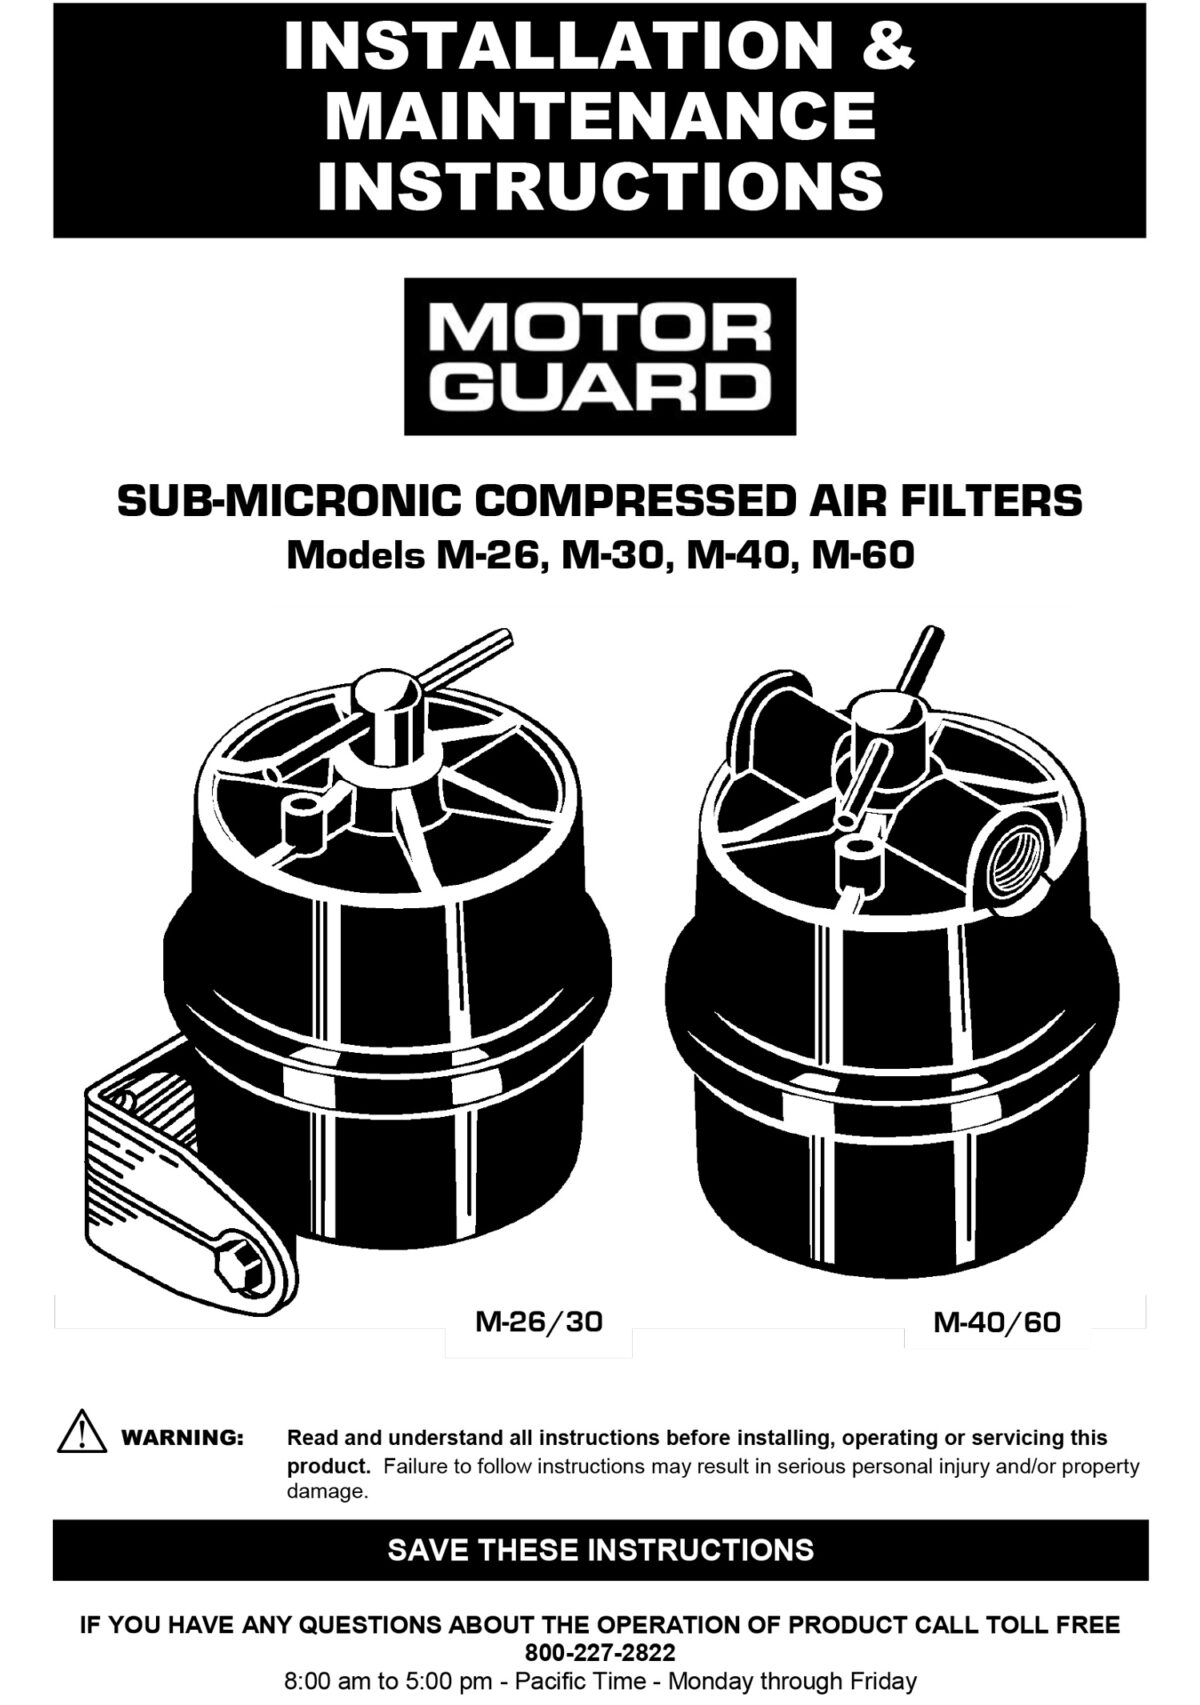 m-26-m-60-sub-micronic-compressed-air-filters-motorguard